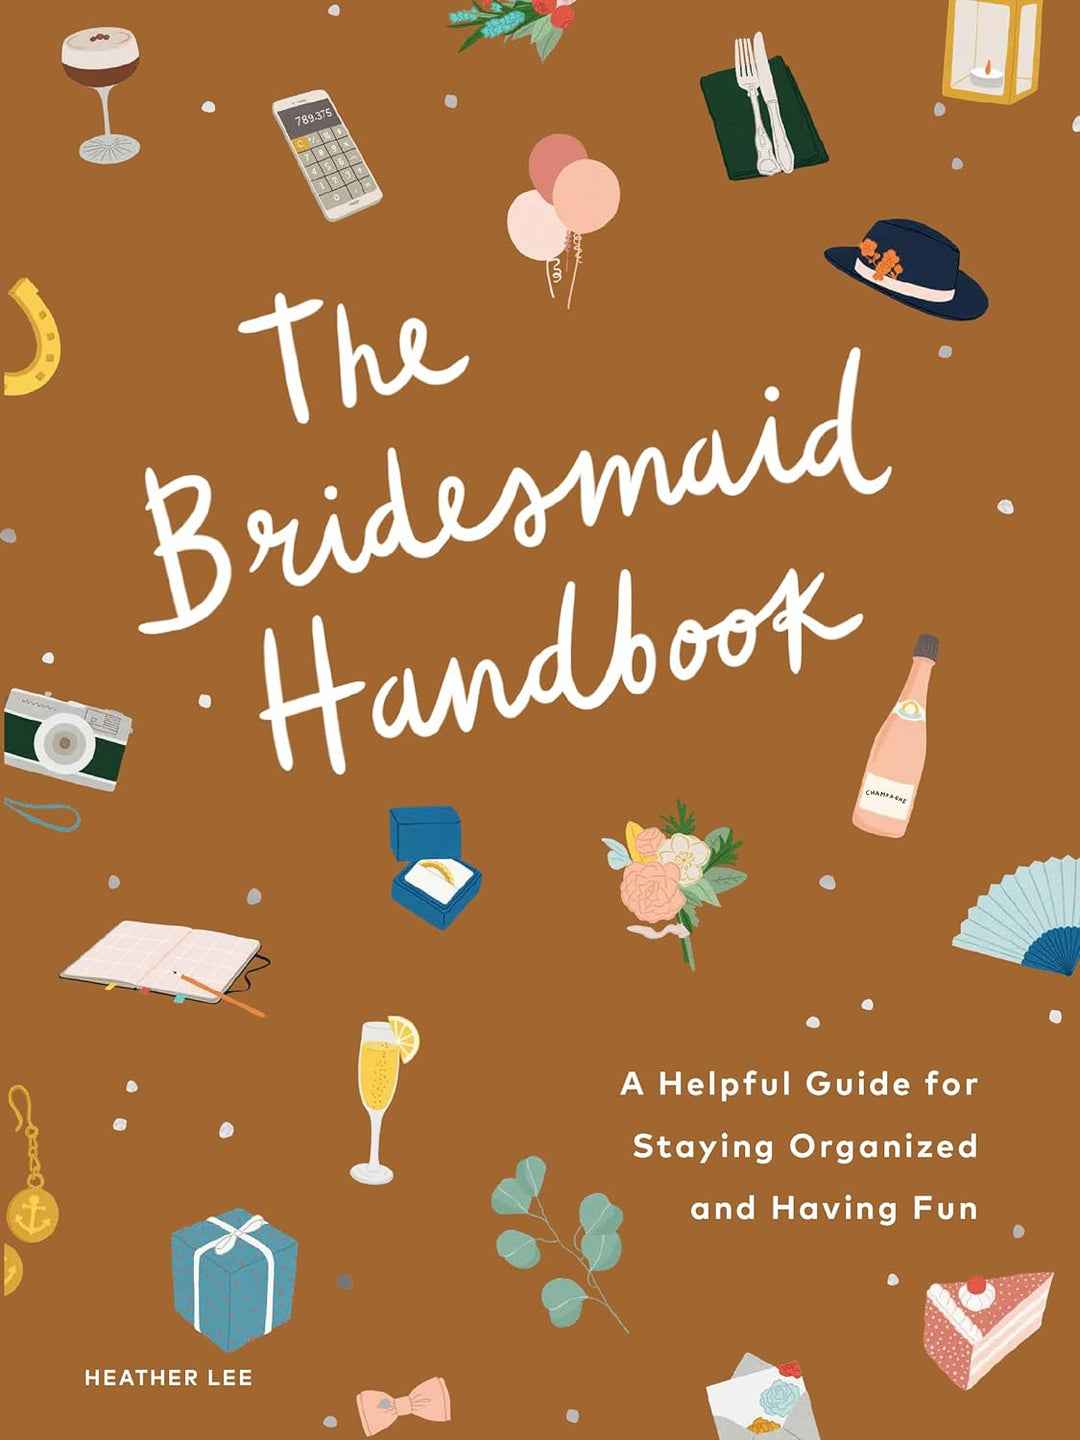 The Bridesmaid's Handbook: A Helpful Guide To Staying Organized & Having Fun